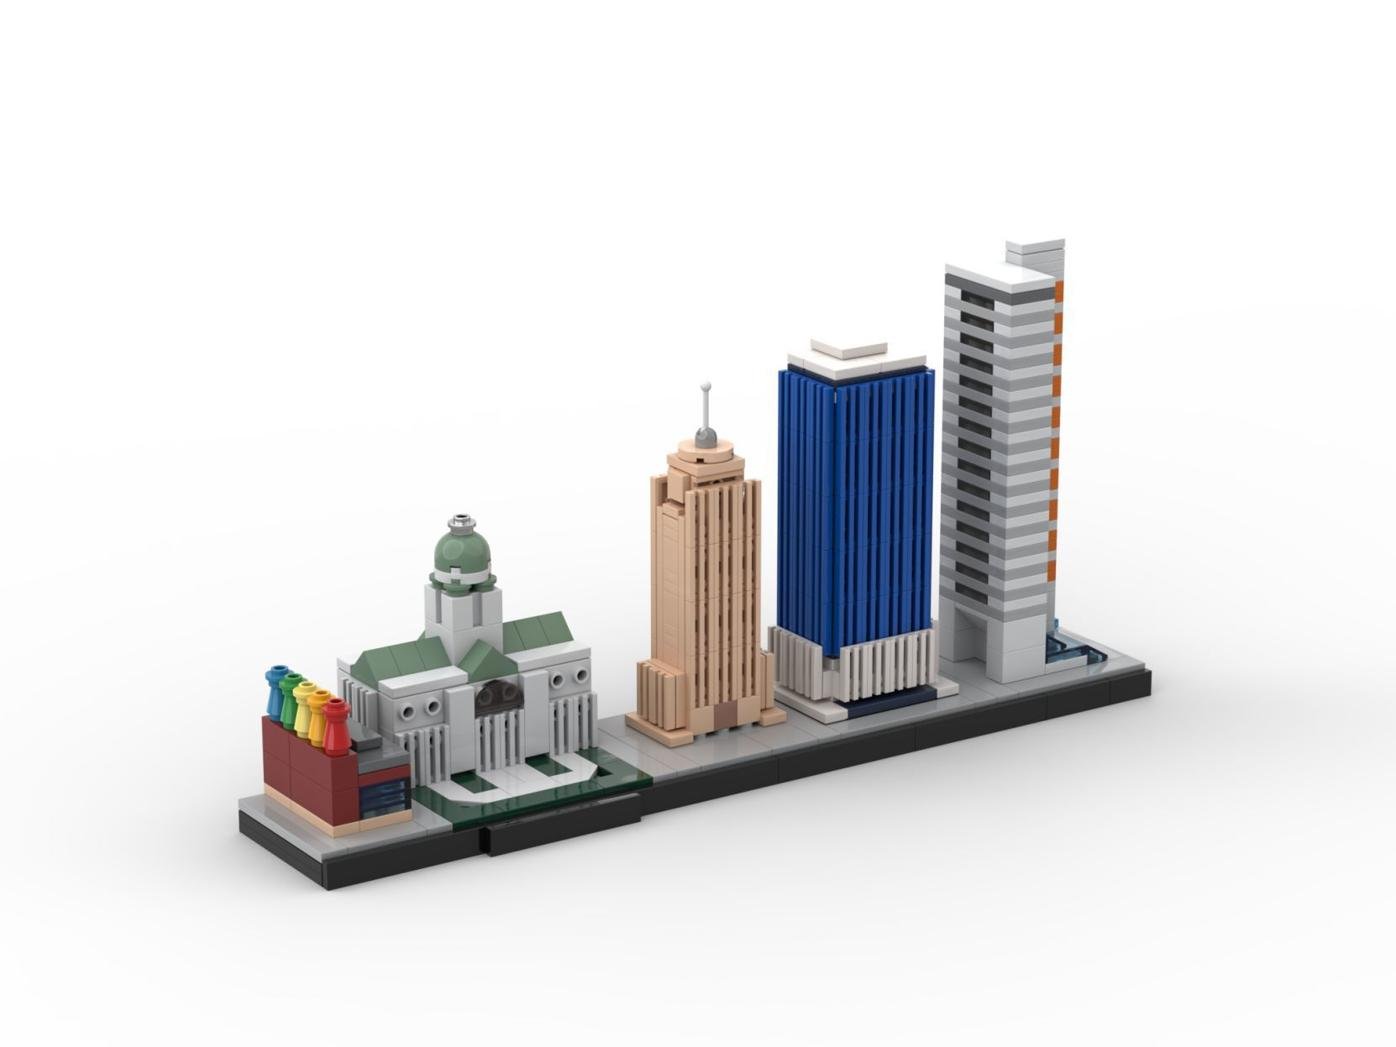 Shanghai 21039 | Architecture | Buy online at the Official LEGO® Shop US